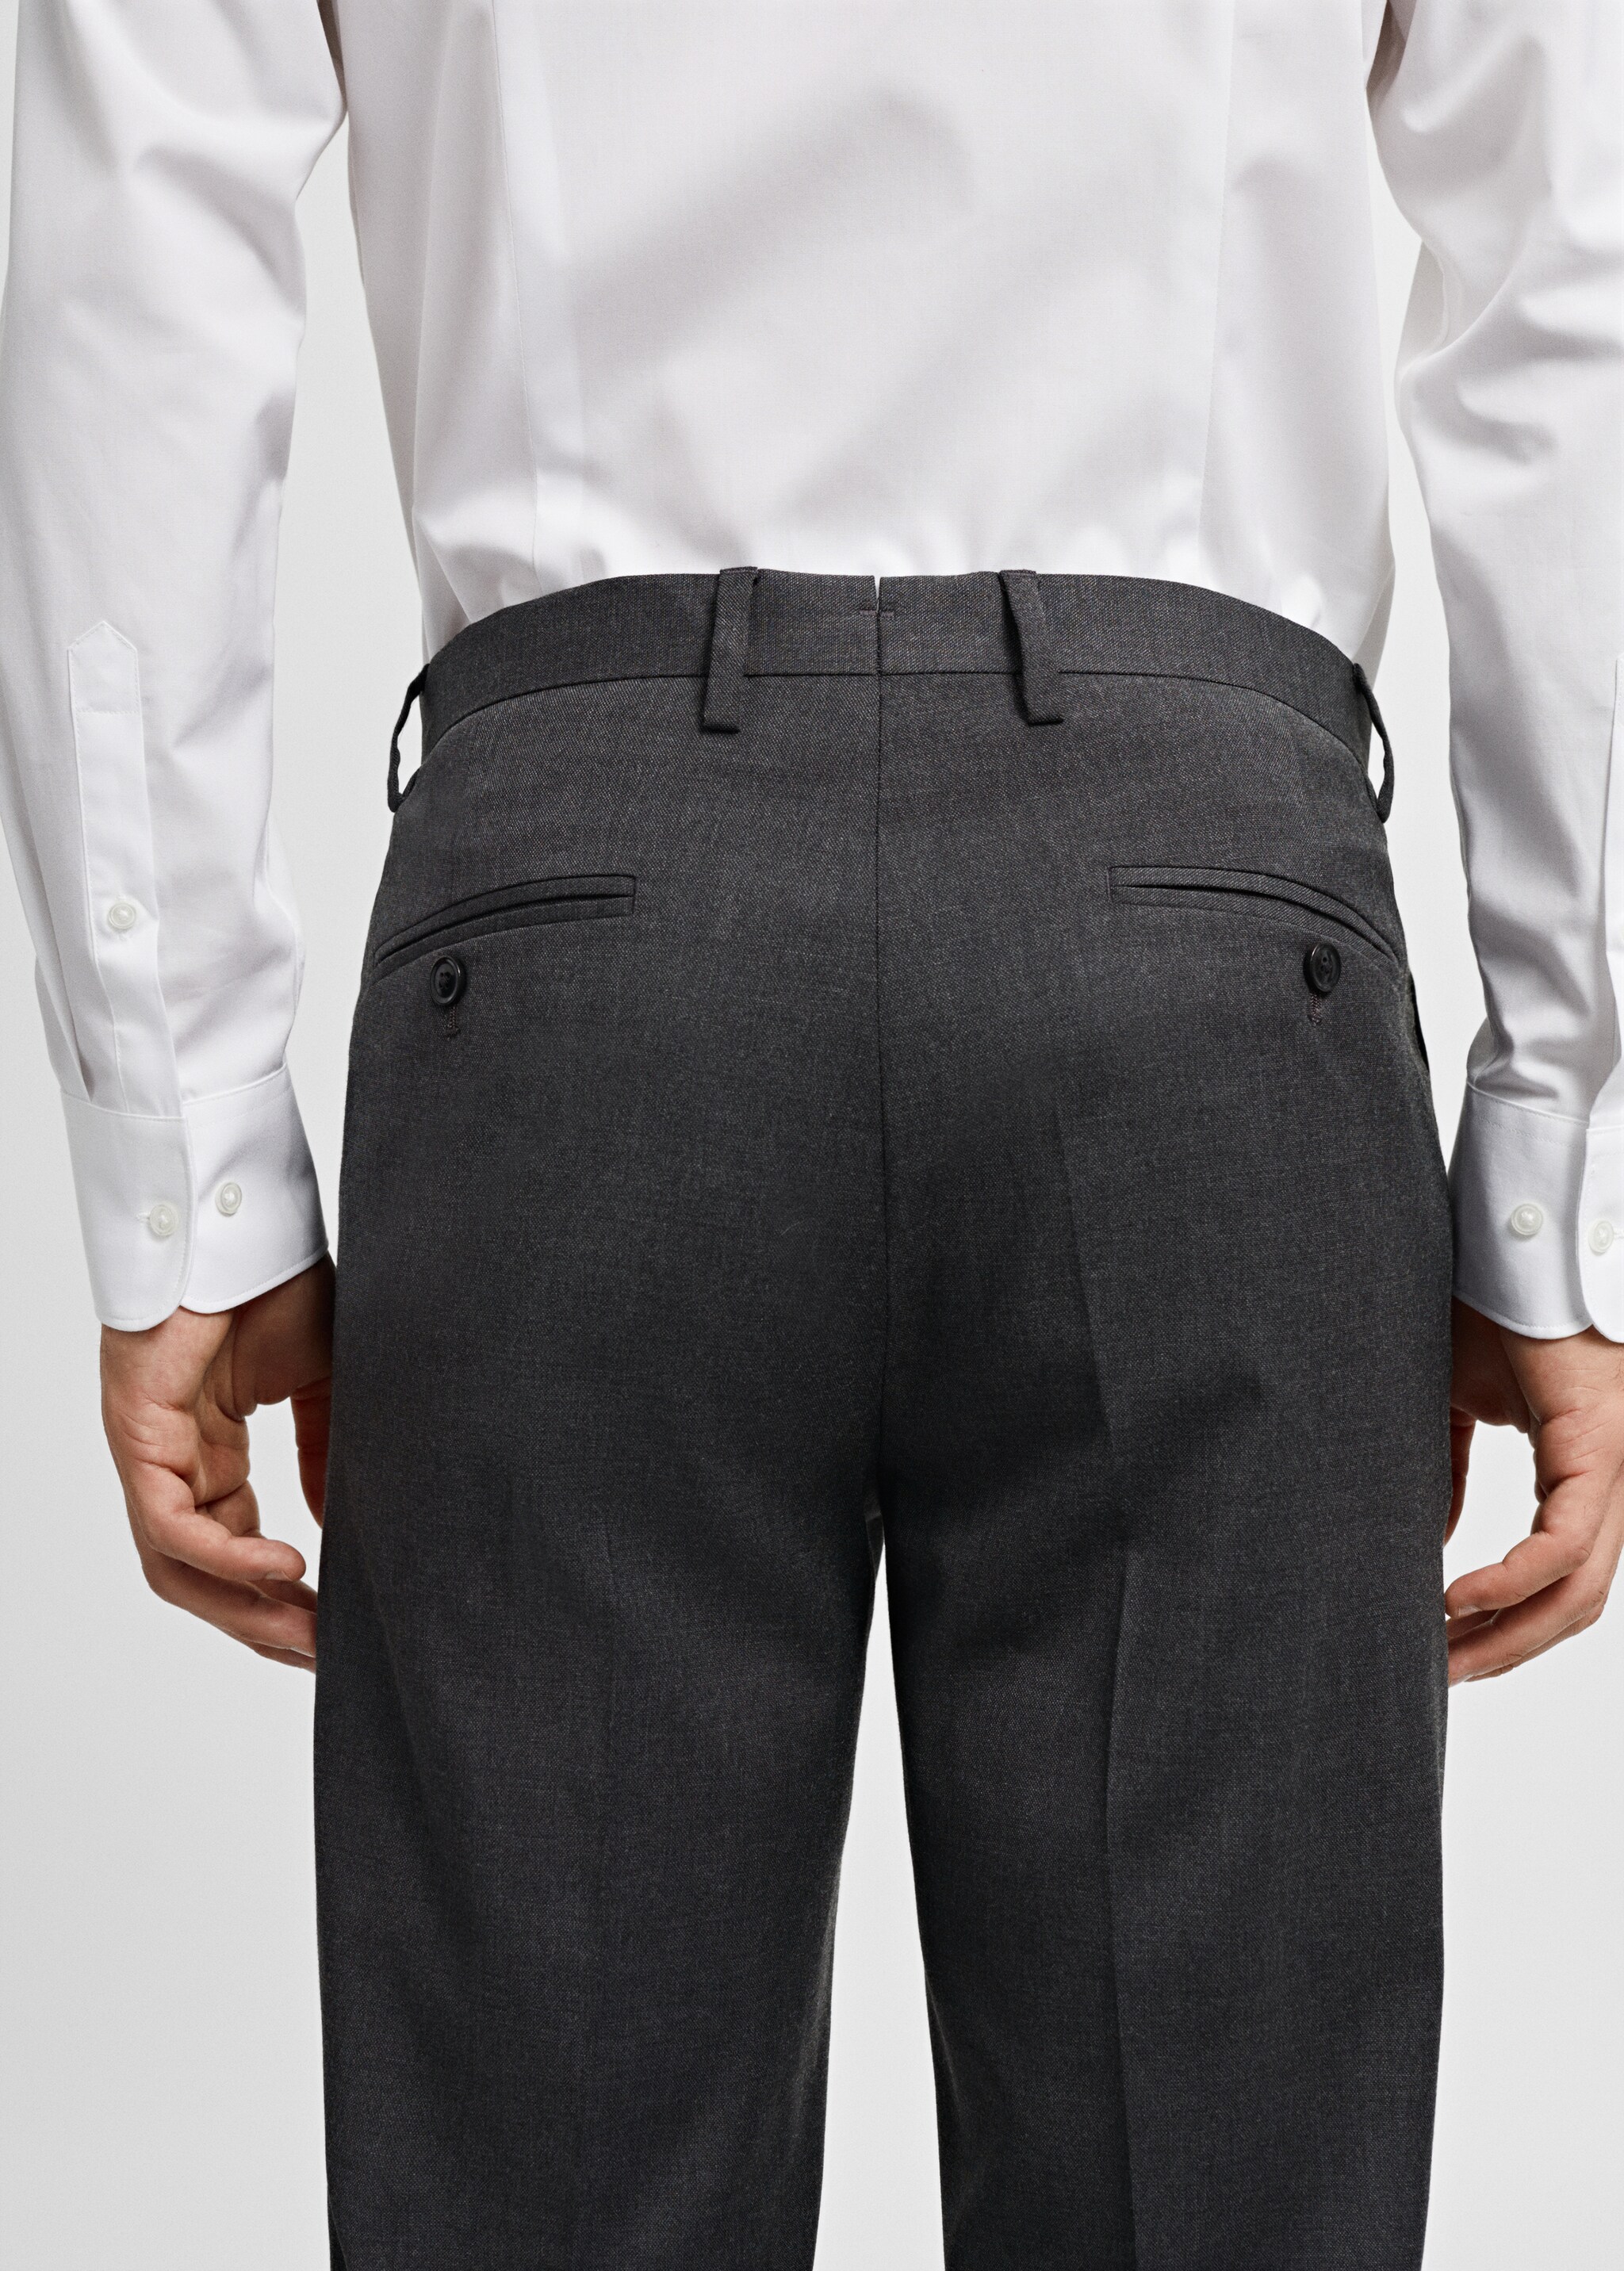  Suit trousers - Details of the article 4